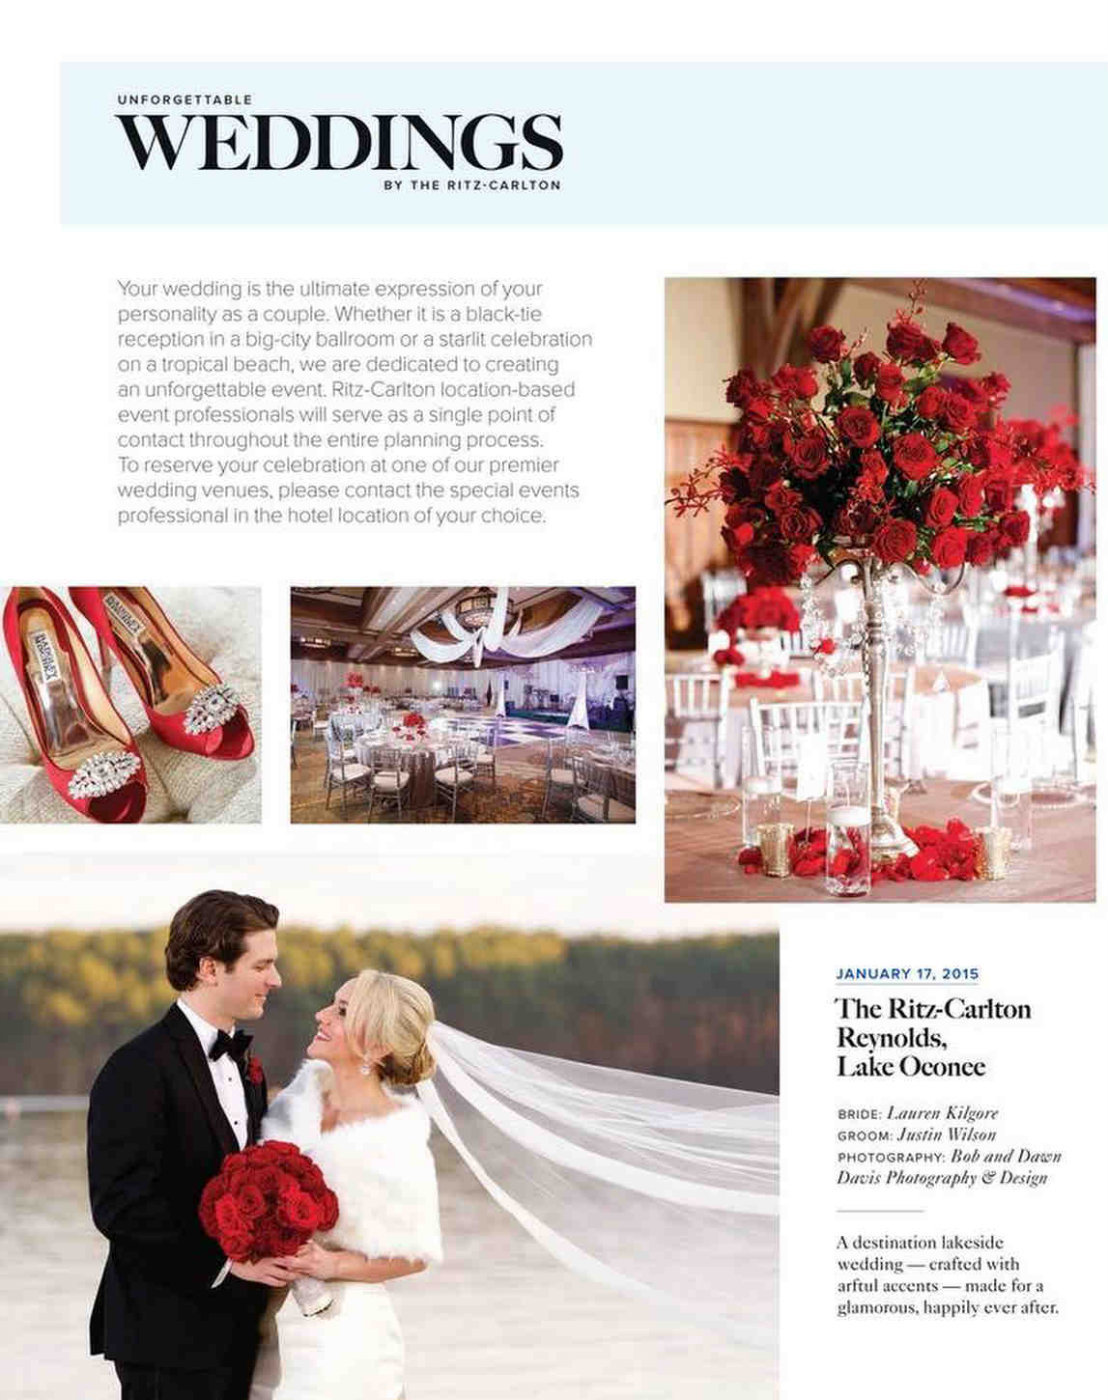 This is so fun to see Lauren and Justin's wedding at the The Ritz-Carlton Reynolds, Lake Oconee featured in the Ritz-Carlton Magazine. Every guest at all the Ritz properties will see their beautiful wedding... so exciting! It's always an honor to see one of our weddings feature... it makes us smile every time. Lauren and Justin.. we're still dreaming about your dreamy wedding!